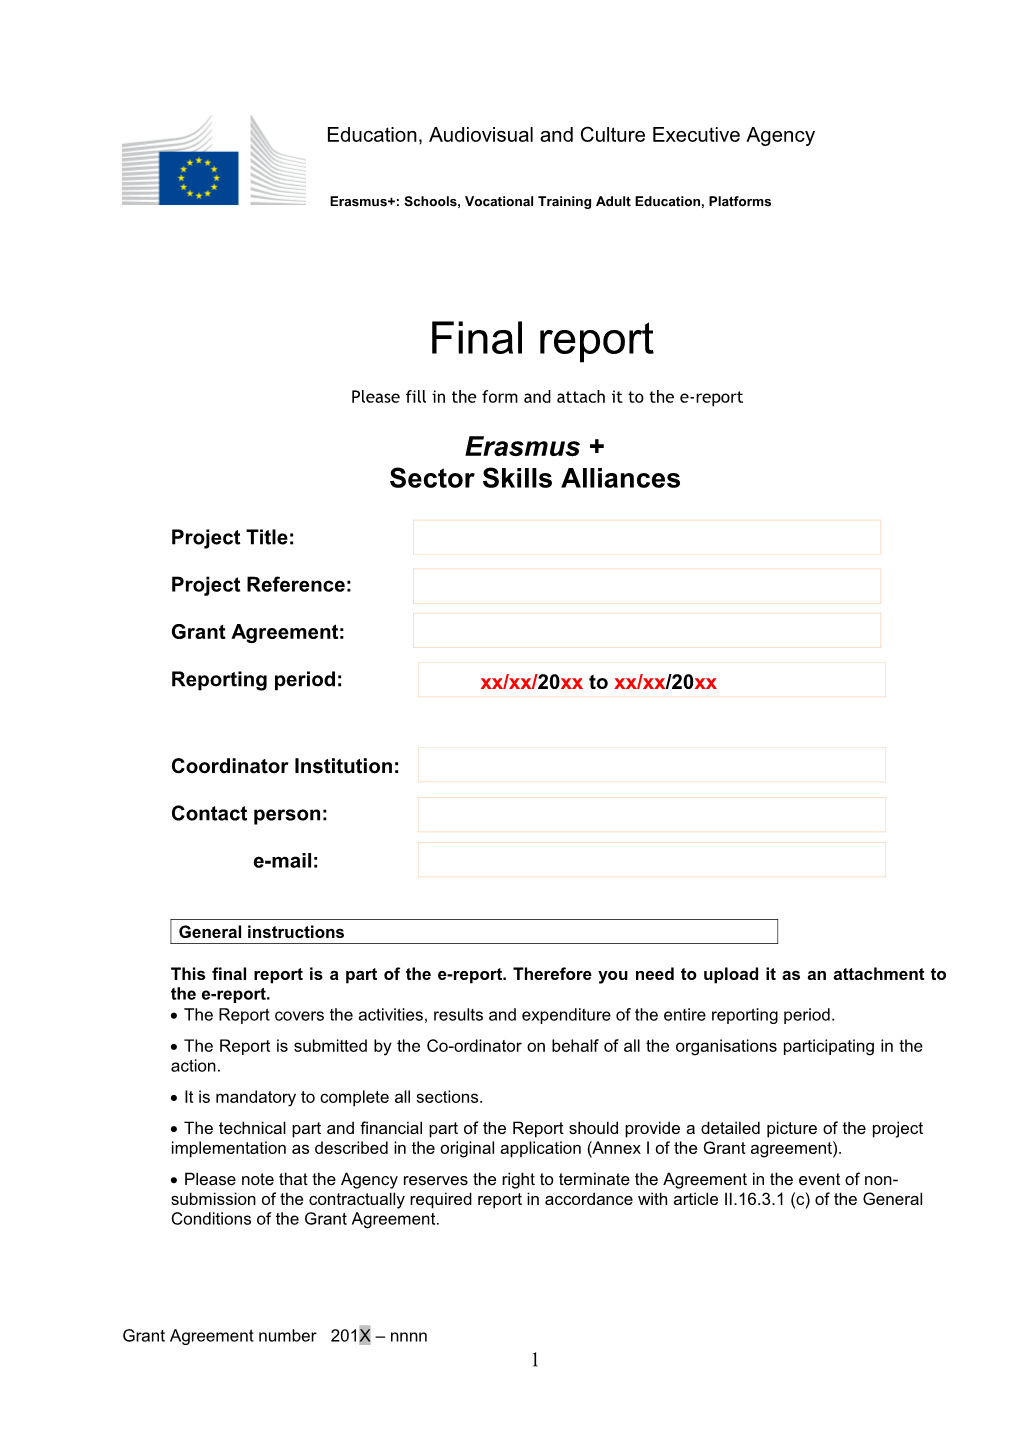 Please Fill in the Form and Attach It to the E-Report